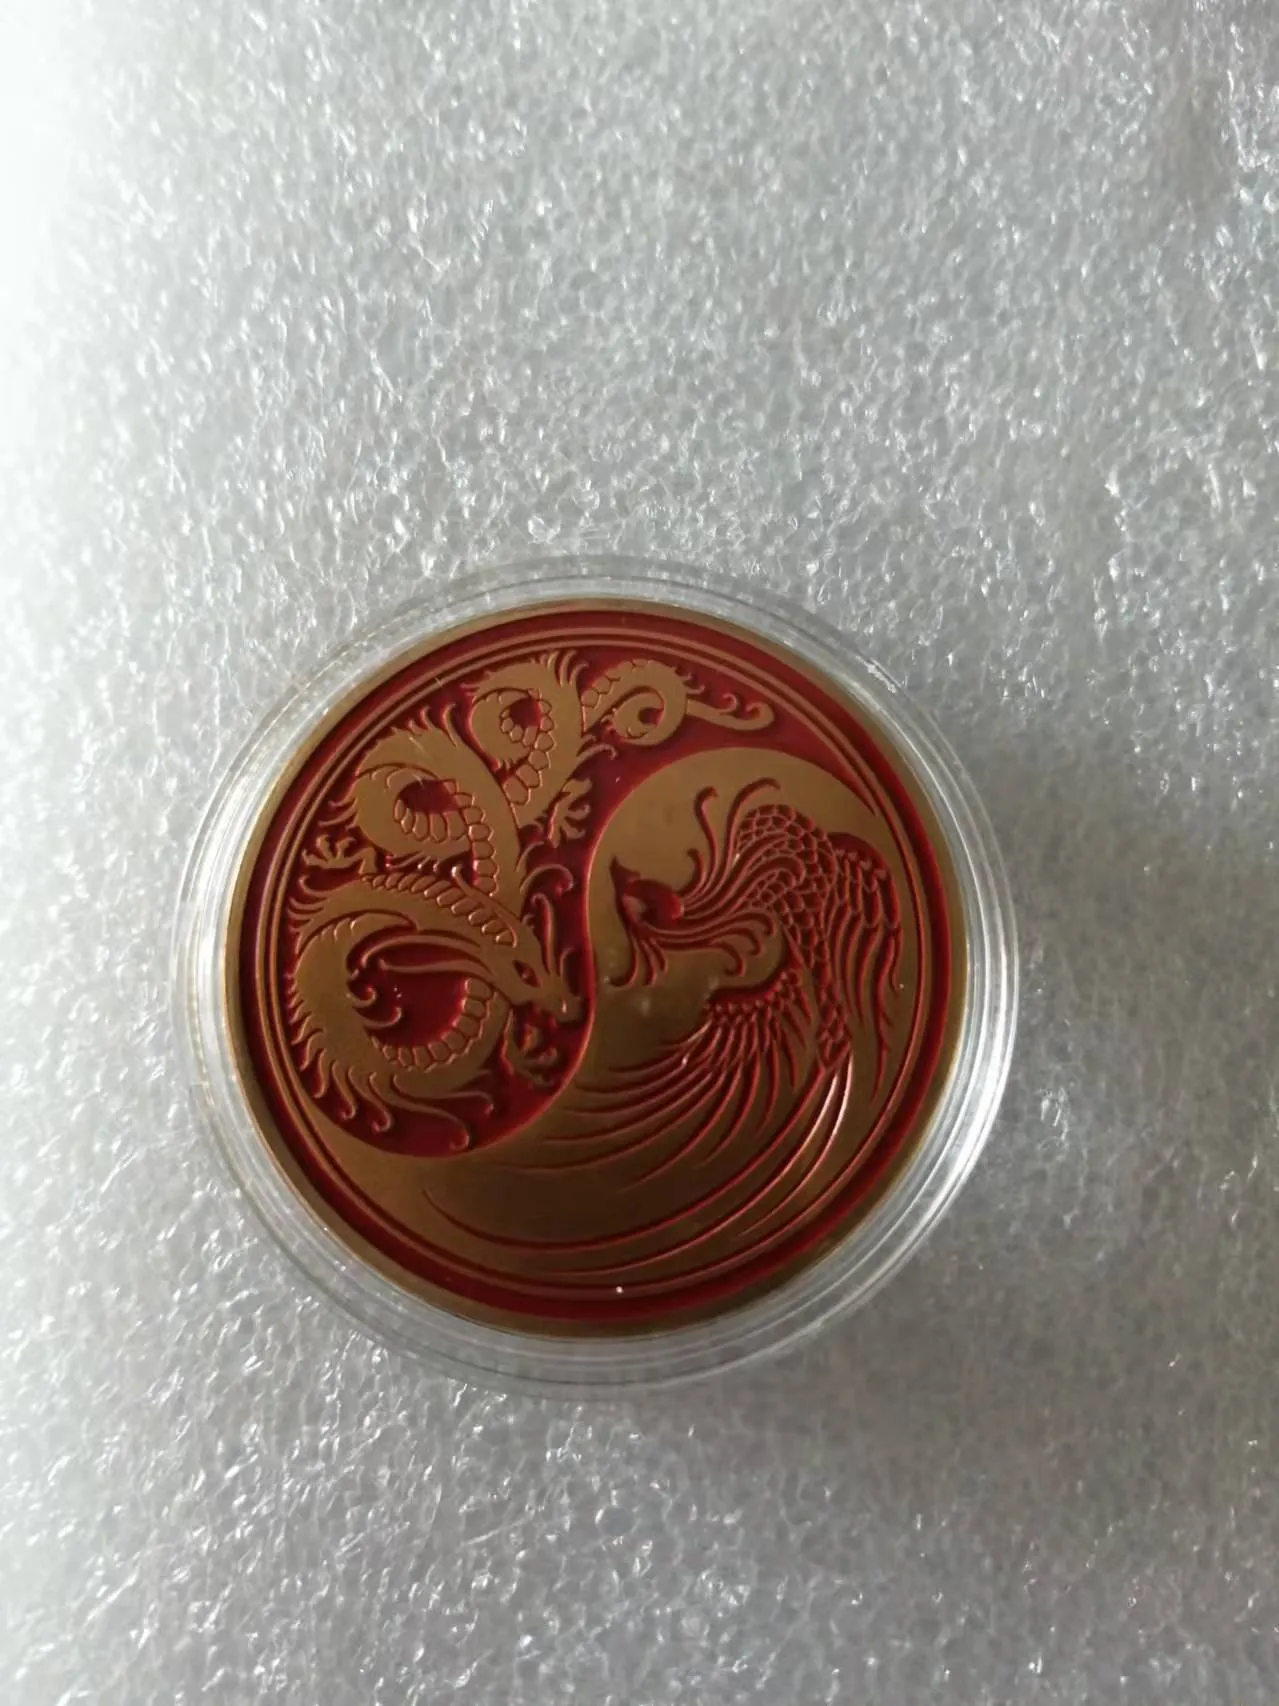 Mysterious Chinese style gift Yin Yang Dragon & Phoenix Three-Dimensional Relief Silver Black Commemorative Medal Tai Chi Coin